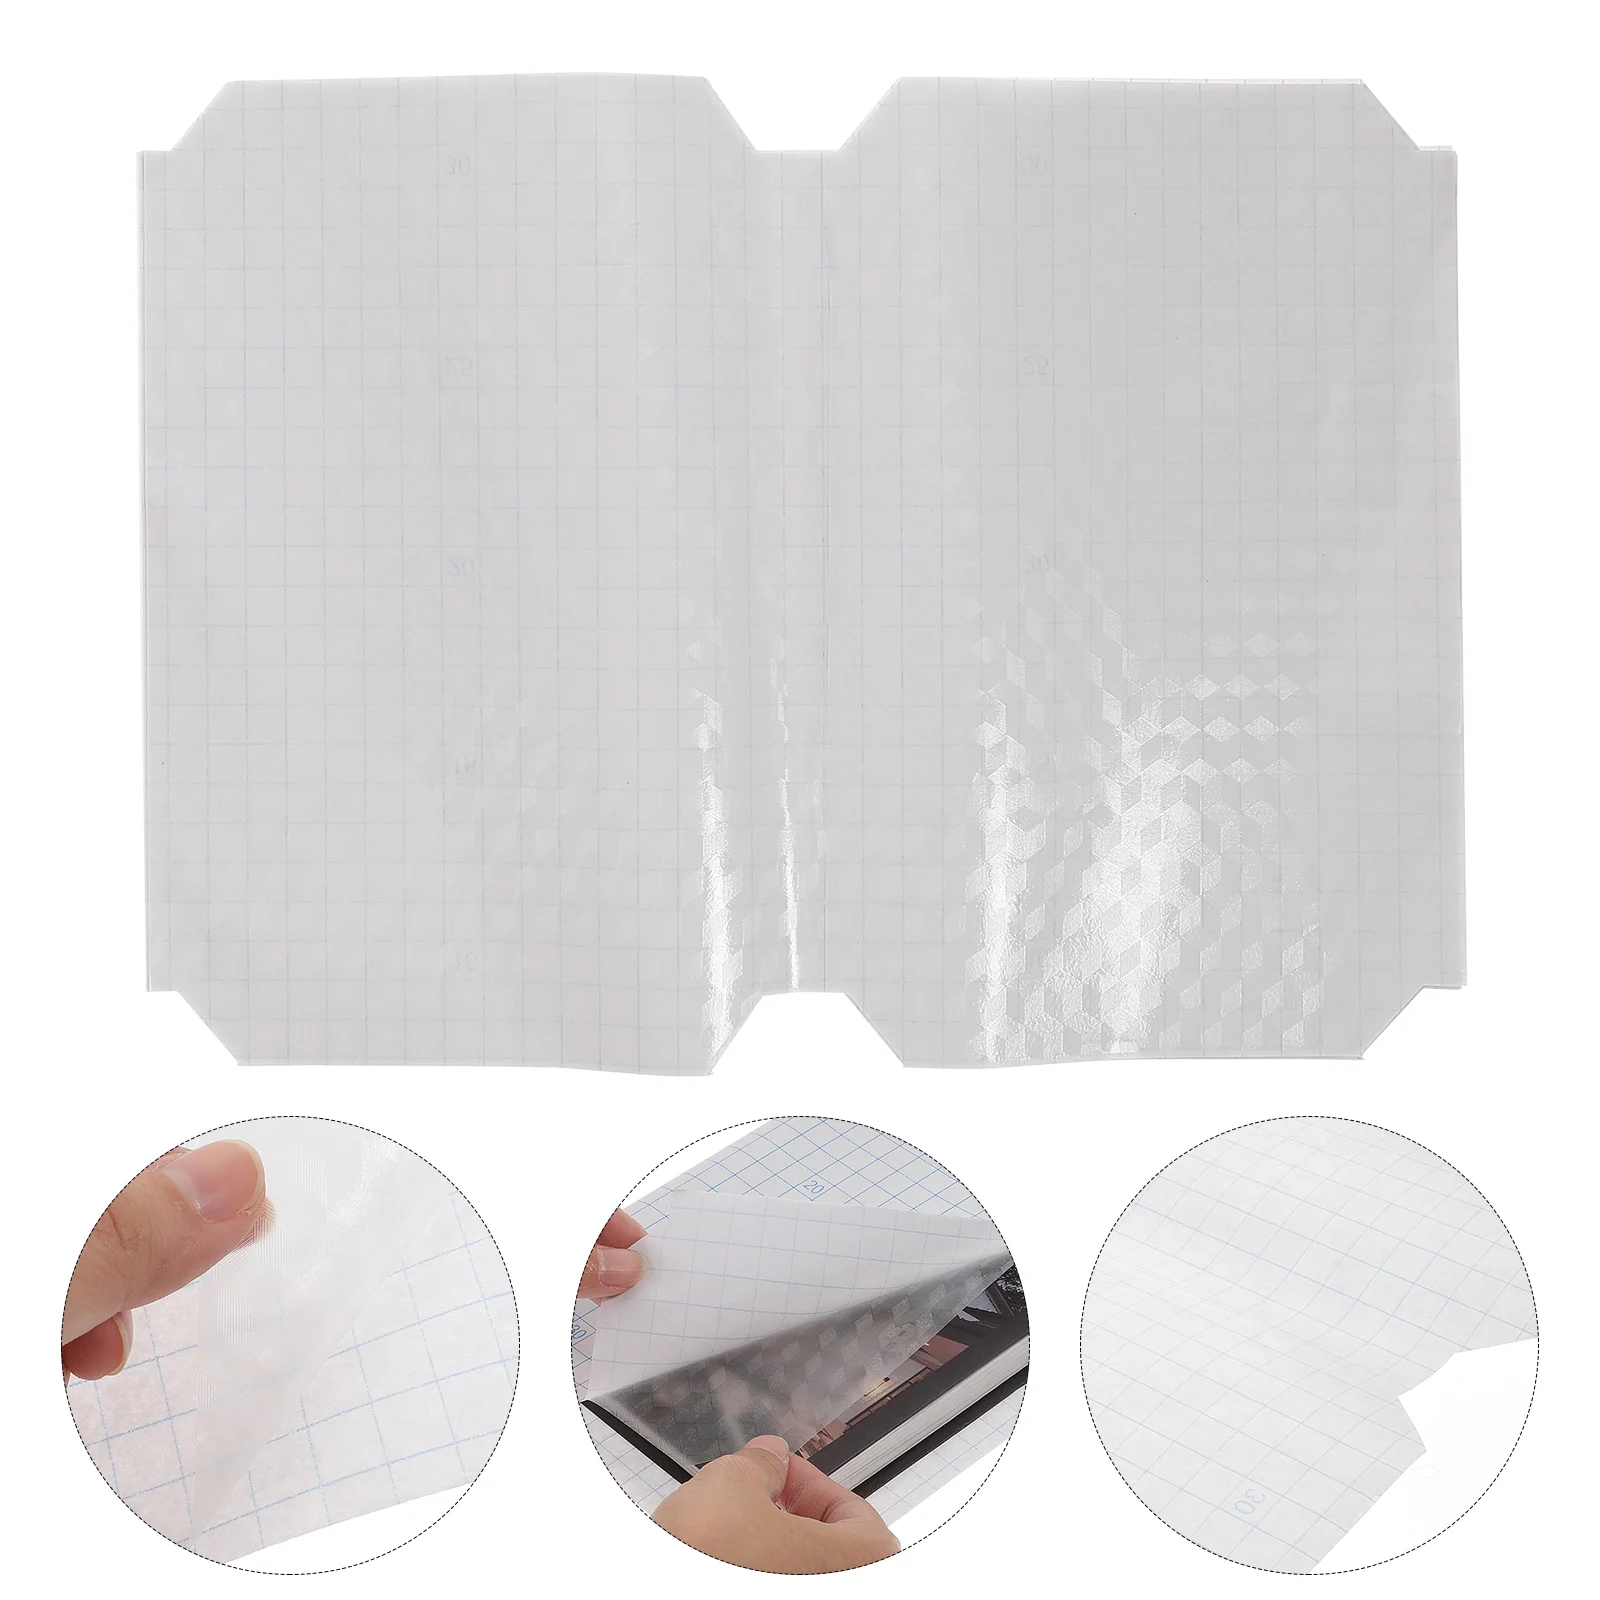 

20 Pcs Book Film Plastic Covers Dustproof Films Textbook Protector Waterproof Protection Transparent Frosted Student Students